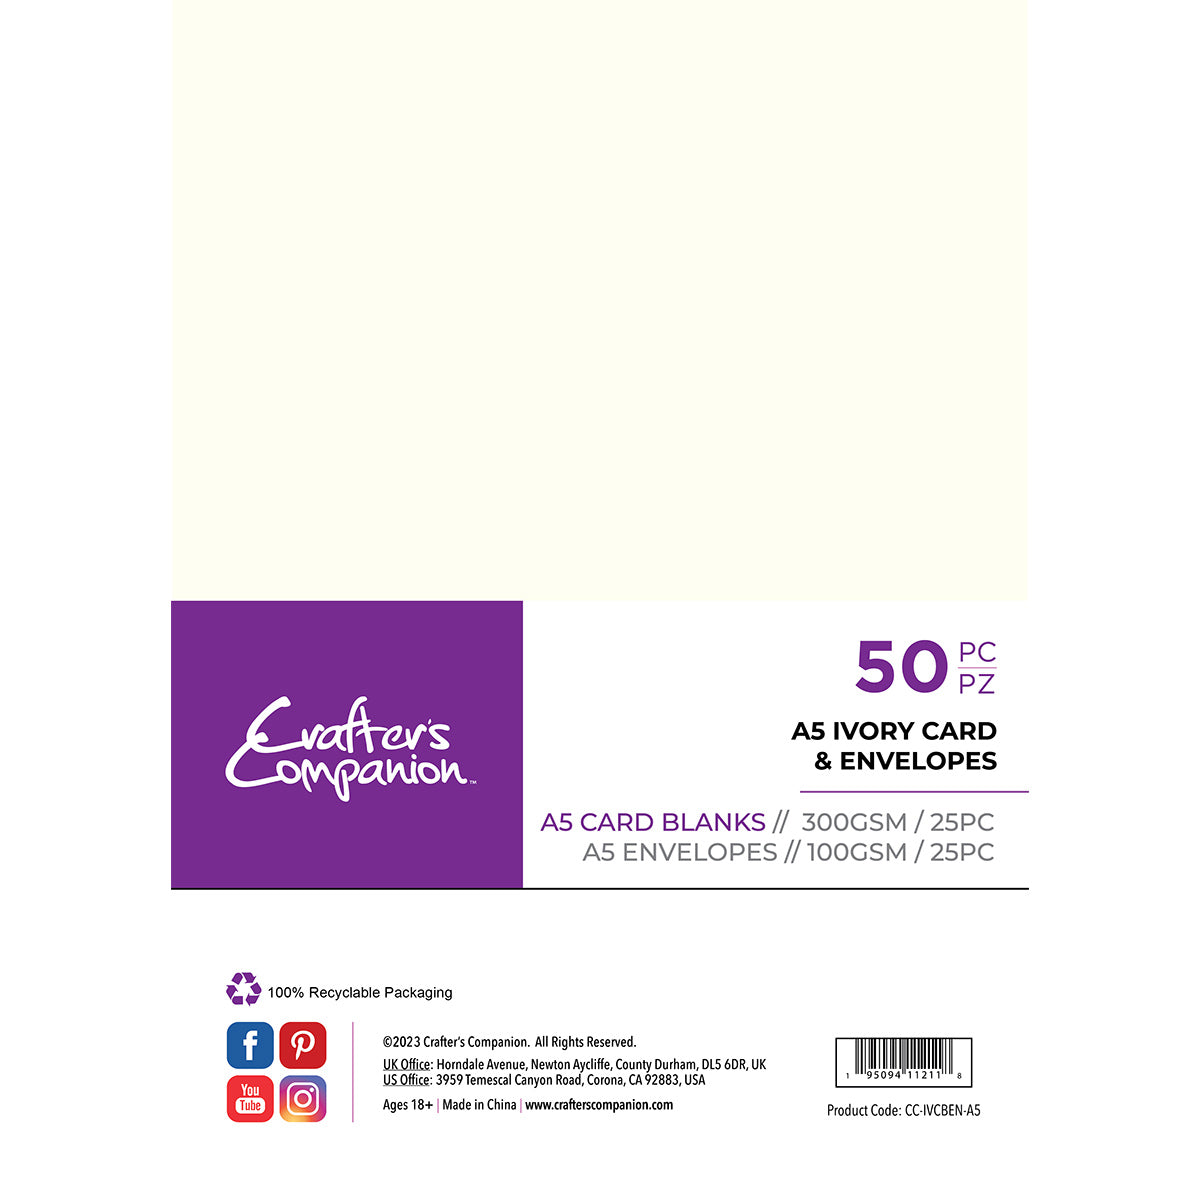 Crafter's Companion - A5 Cards & Envelopes 50 piece - Ivory